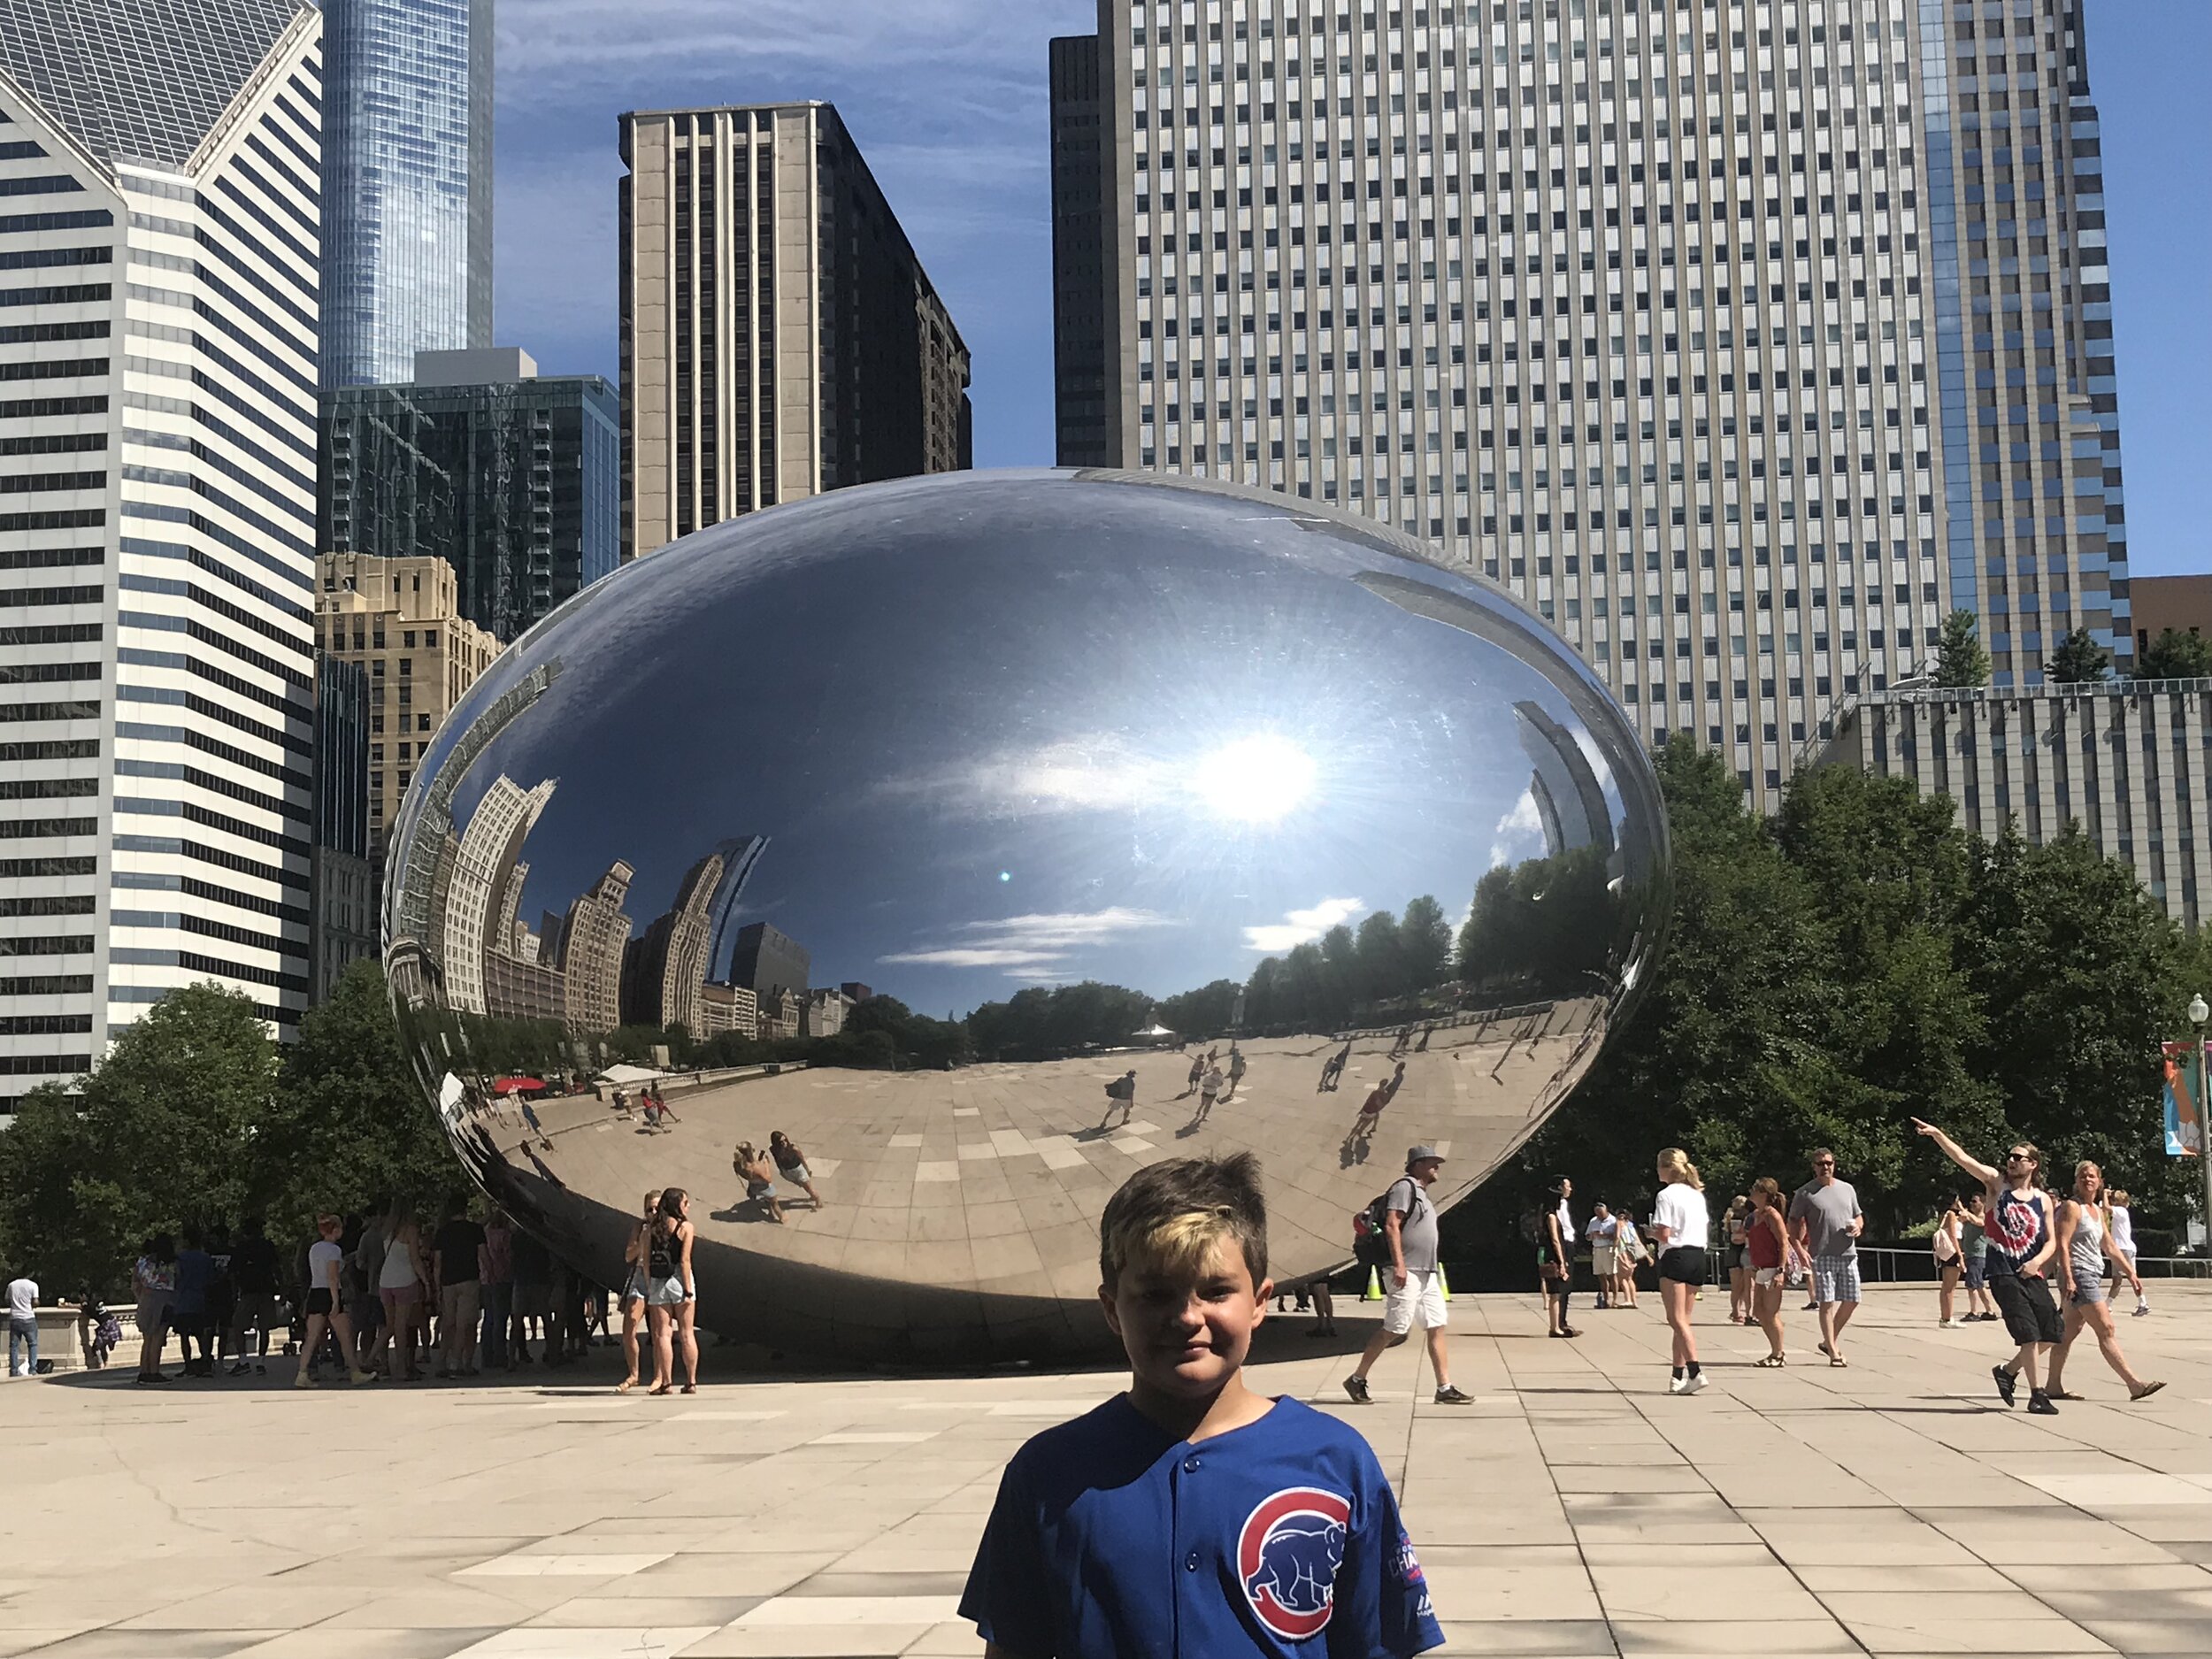 Ollie at the Egg before heading to Wrigley Field